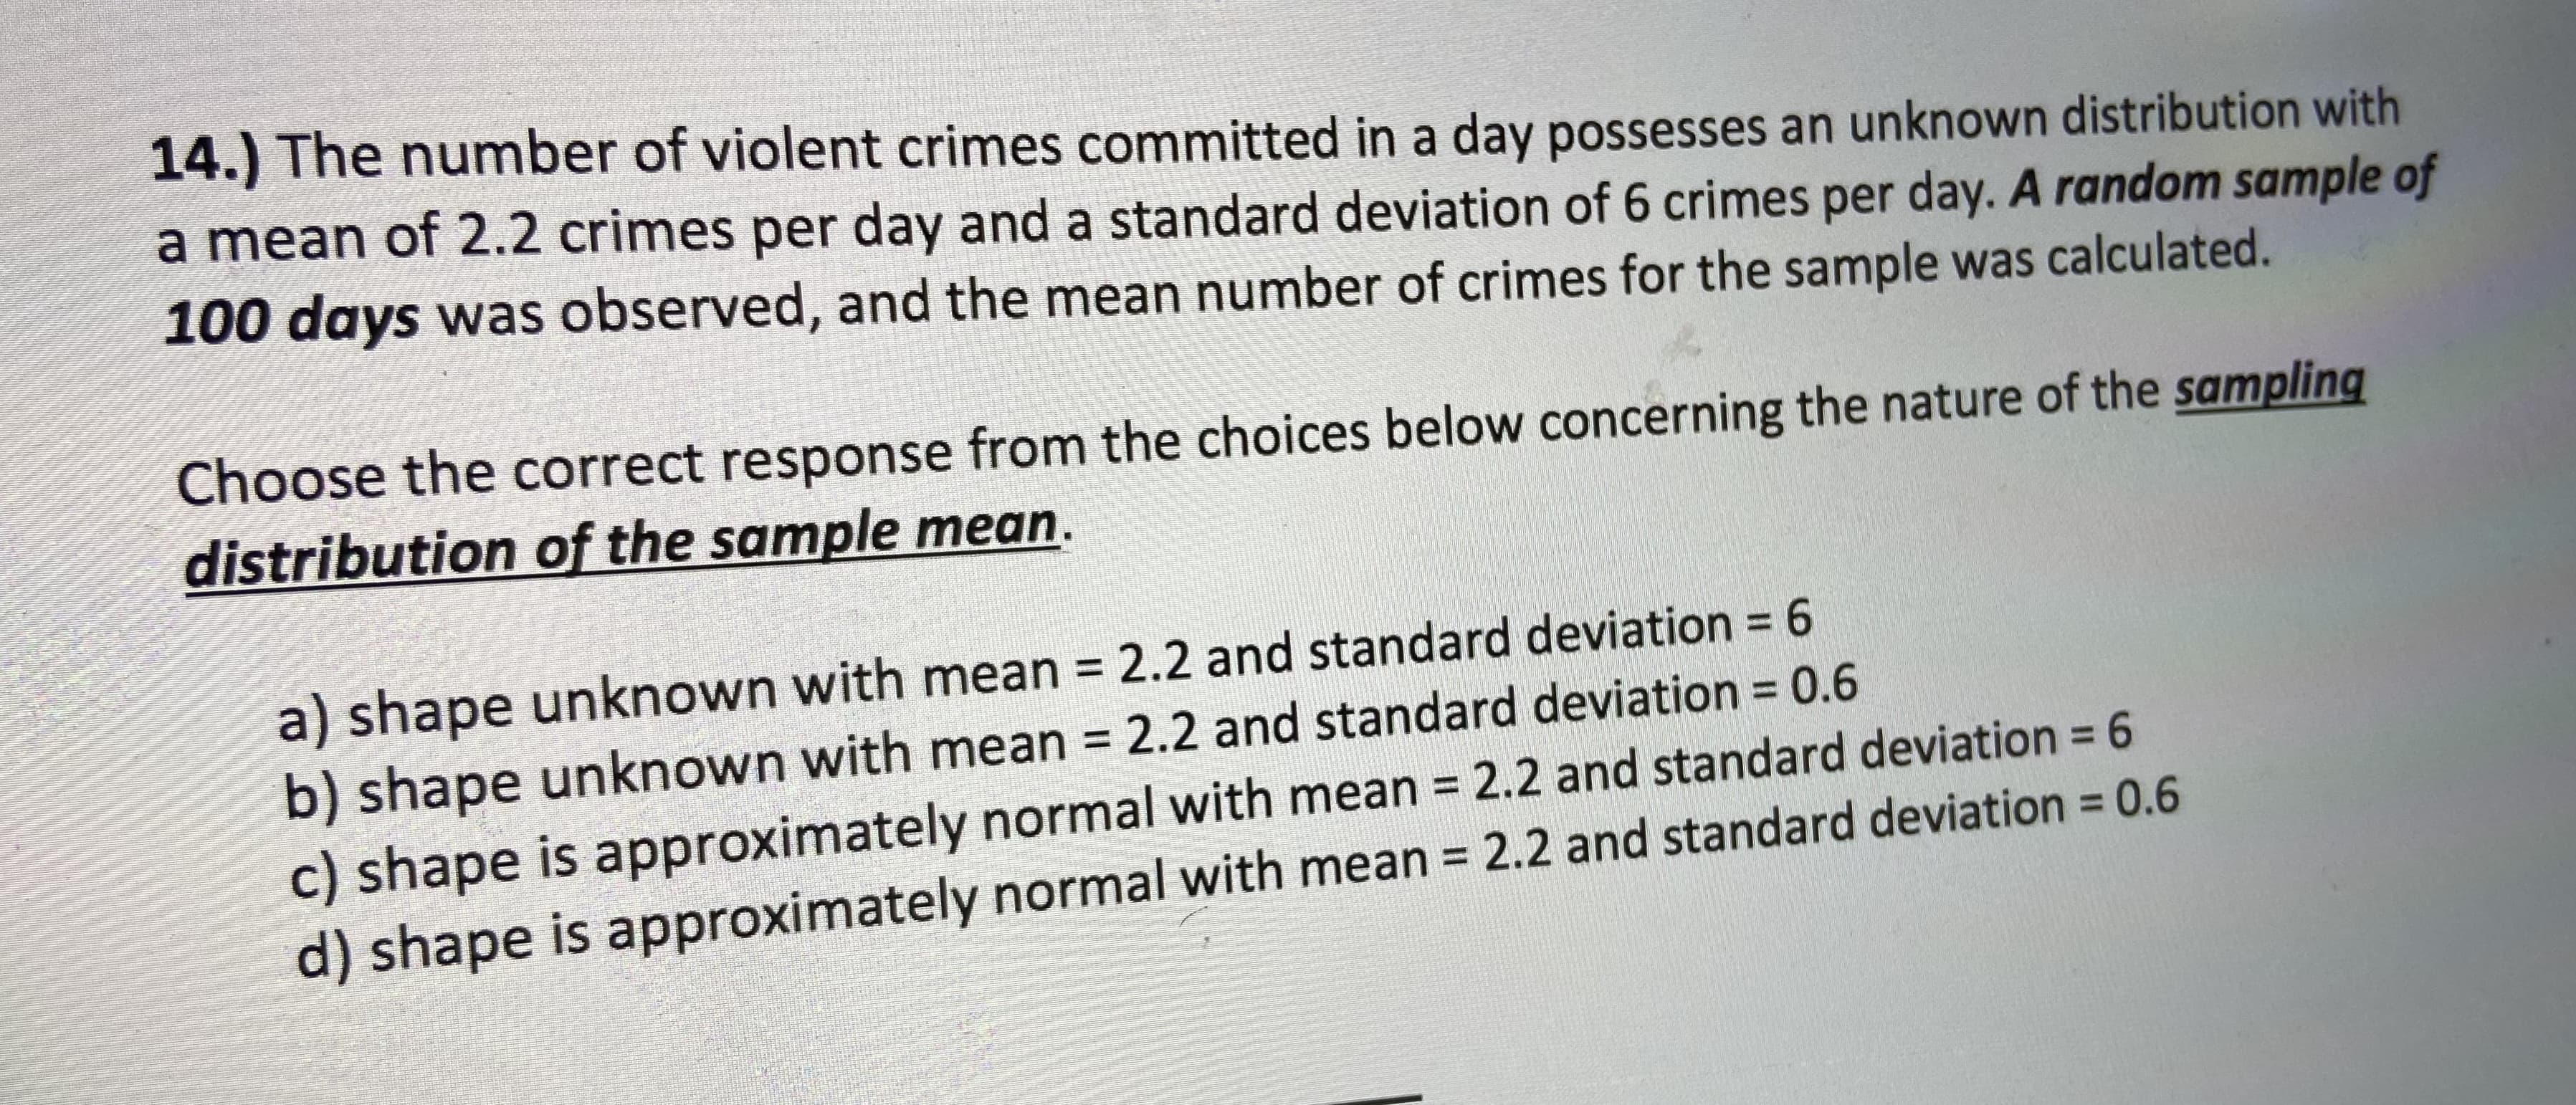 14.) The number of violent crimes committed in a day possesses an unknown distribution with
a mean of 2.2 crimes per day and a standard deviation of 6 crimes per day. A random sample of
100 days was observed, and the mean number of crimes for the sample was calculated.
